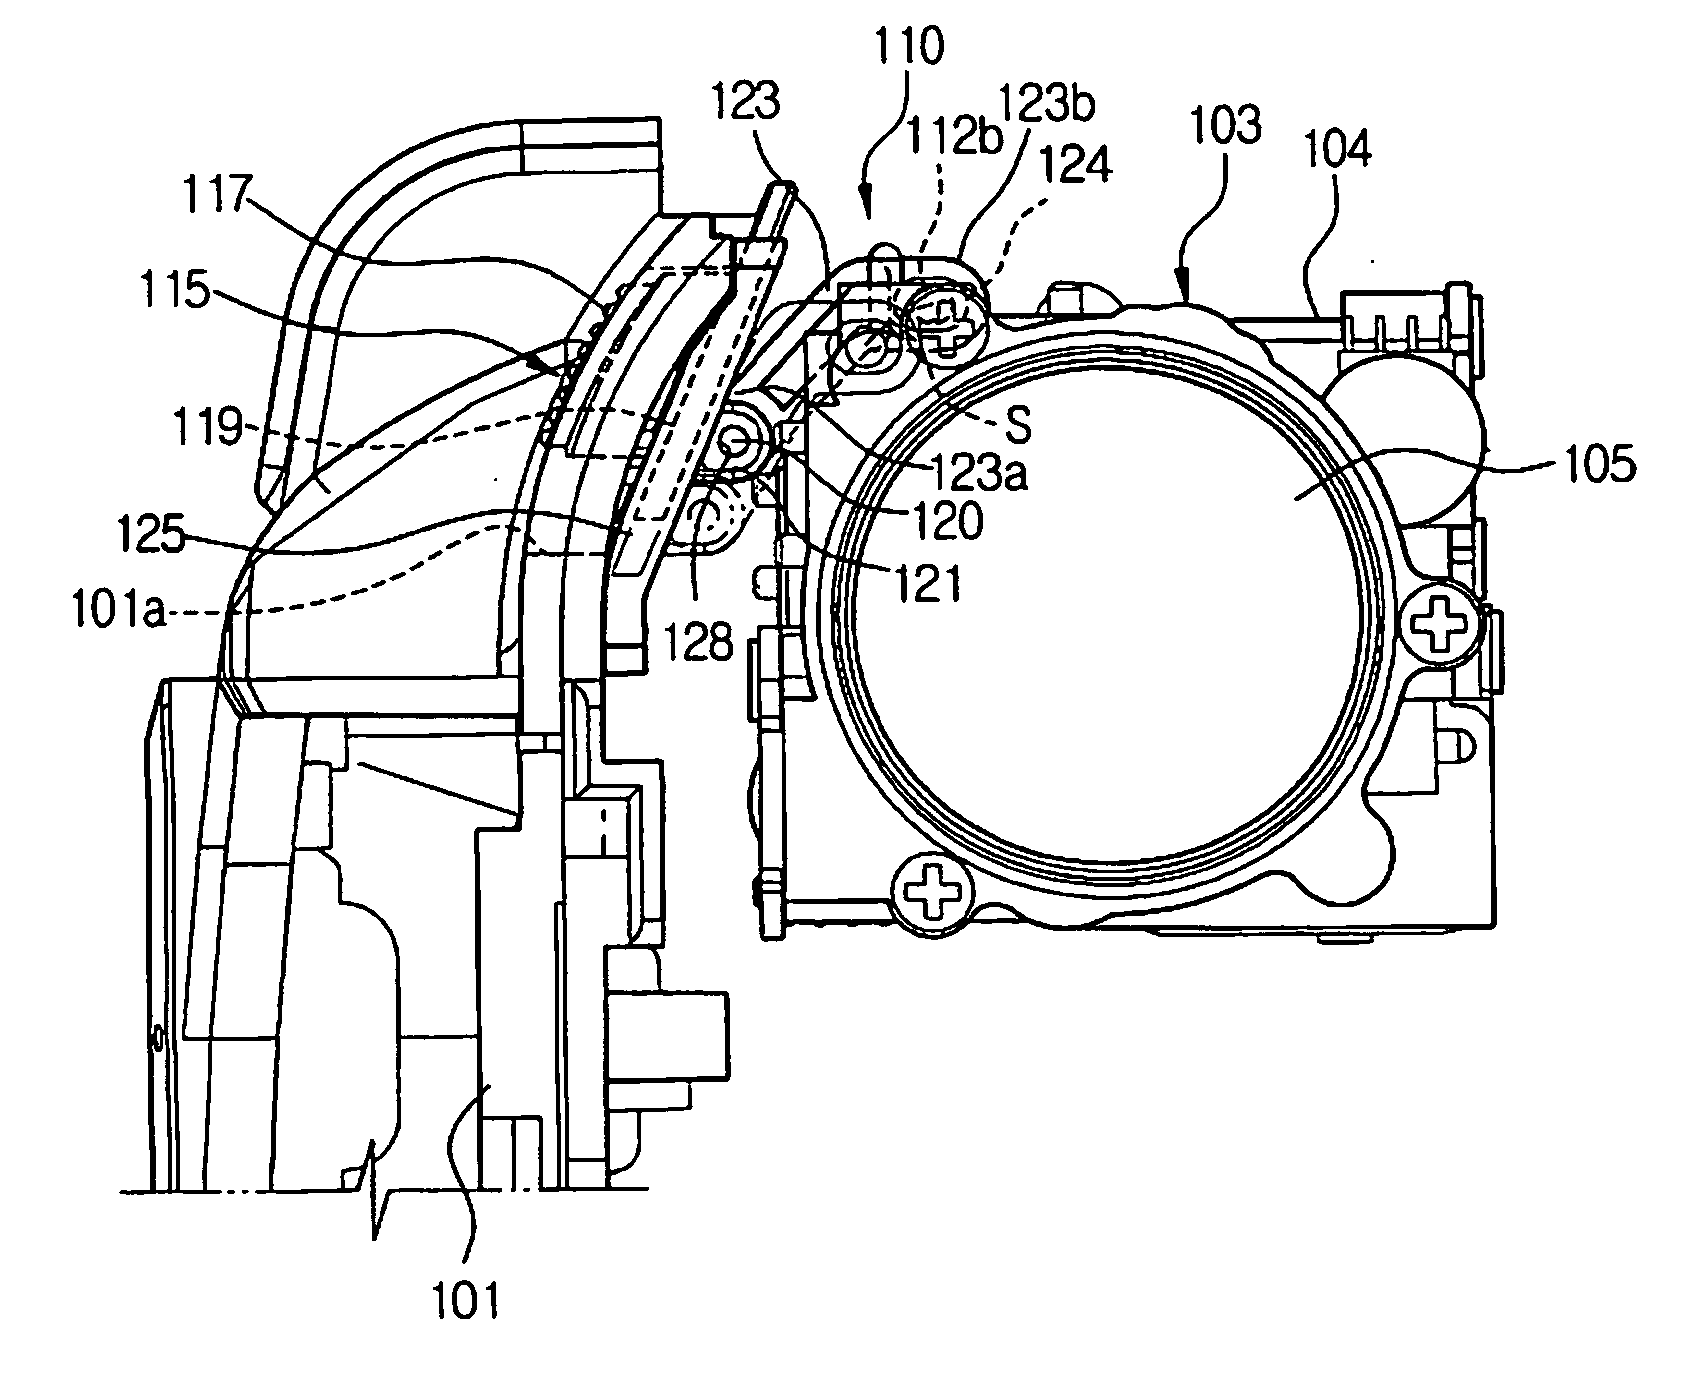 Optical low pass filter switching apparatus of digital camcorder